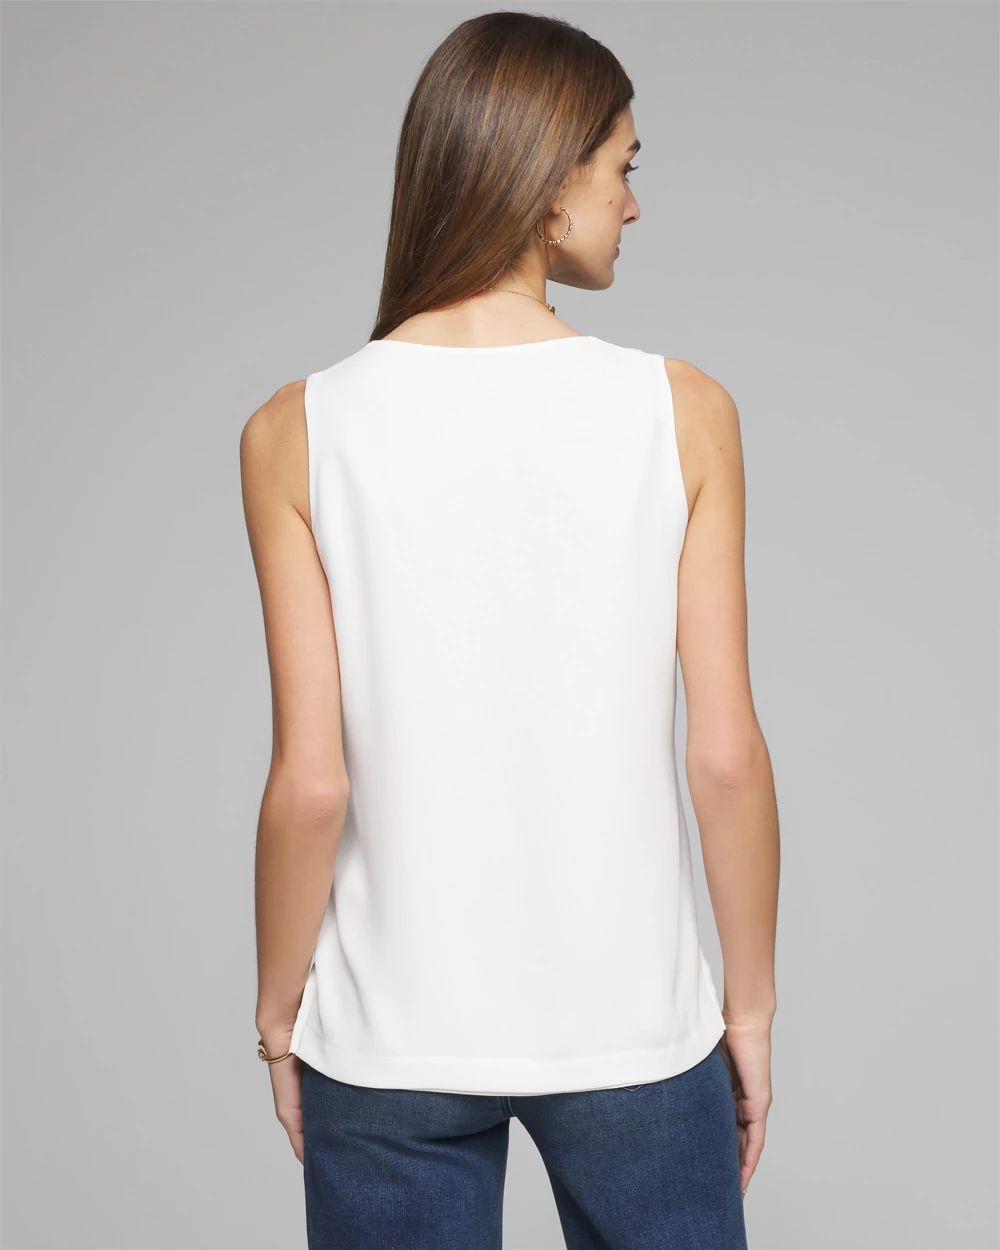 Outlet WHBM V-Neck Shell click to view larger image.